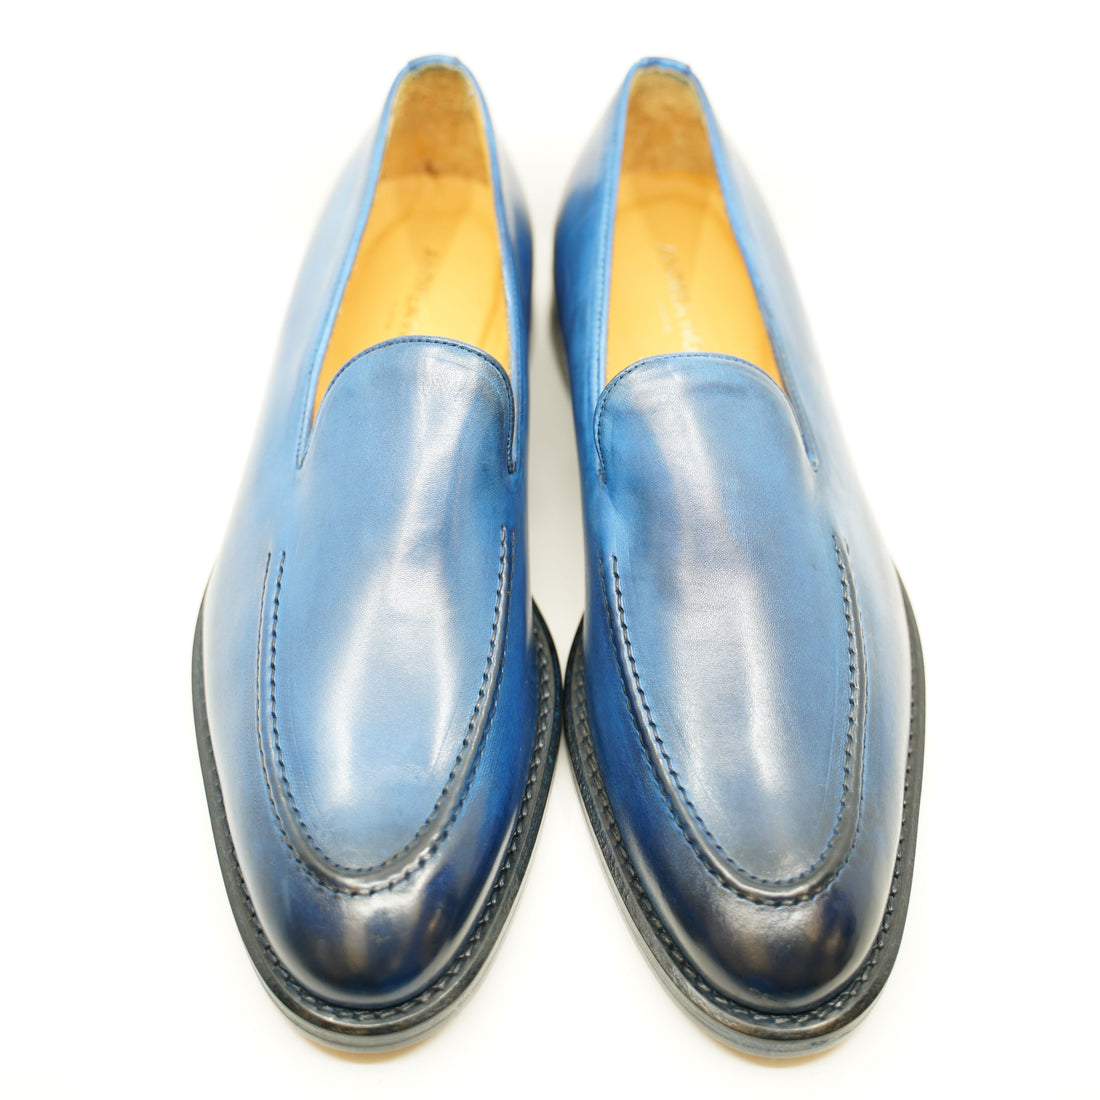 Andrea Nobile - Light Blue leather dress loafer with burgundy sole